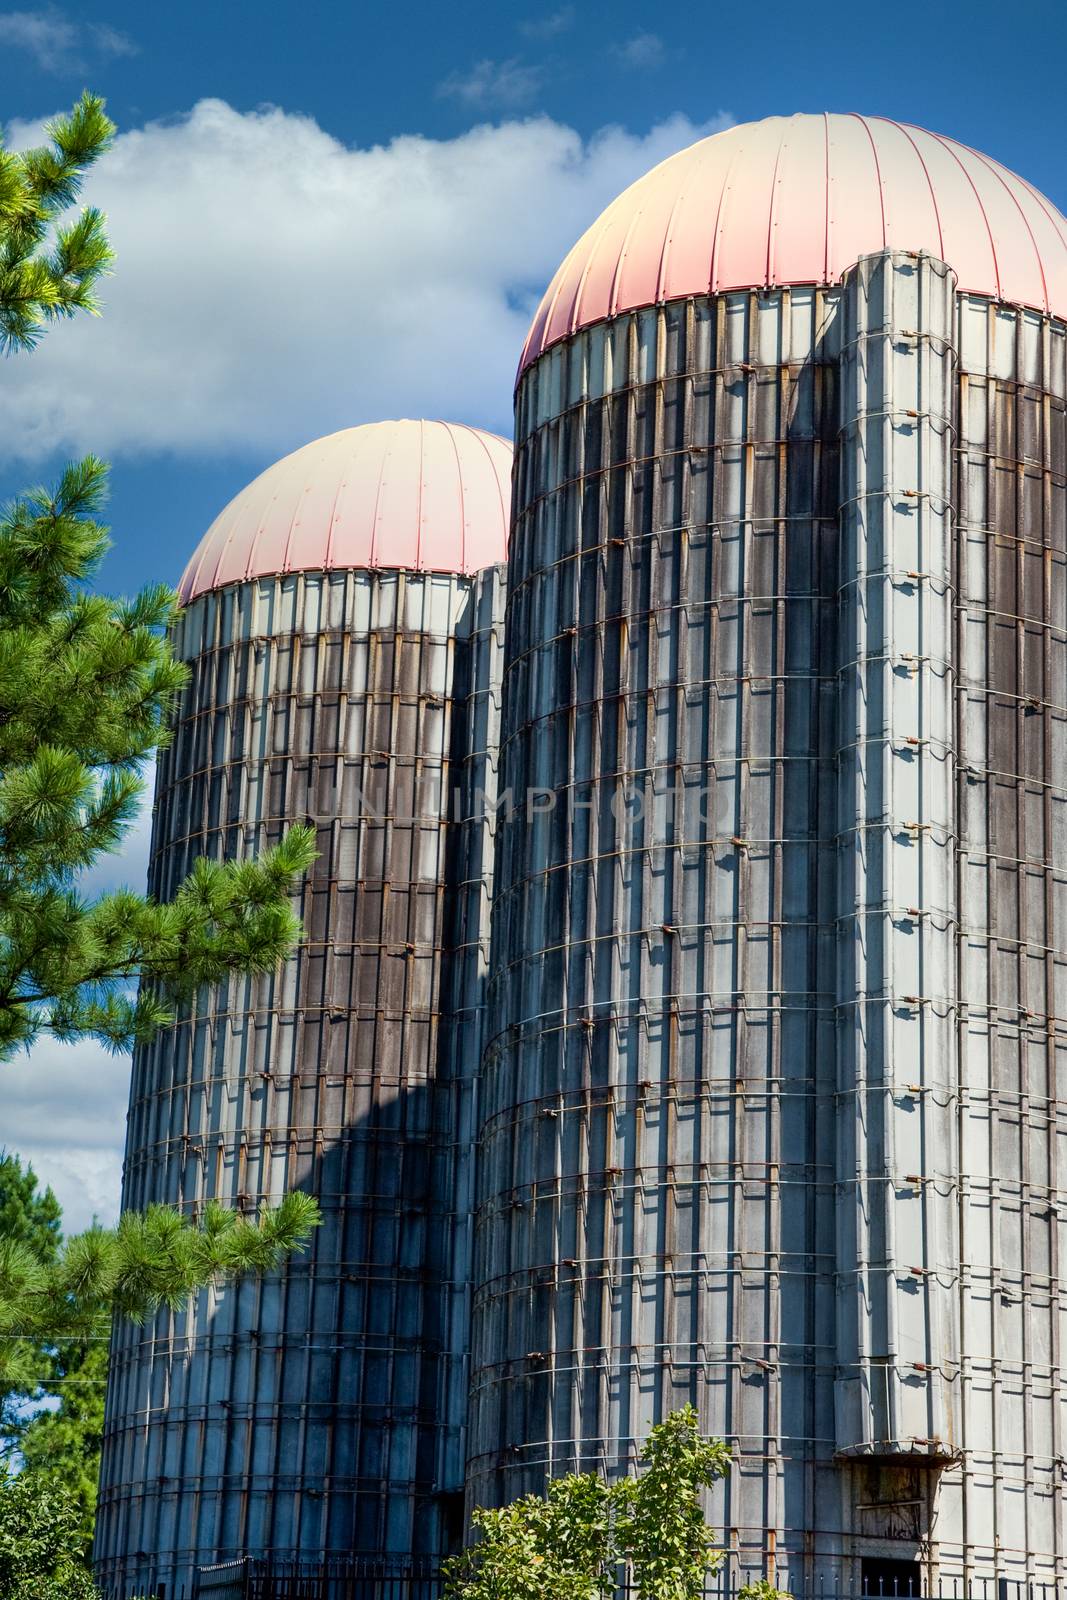 Two old grain silos under a blue sky